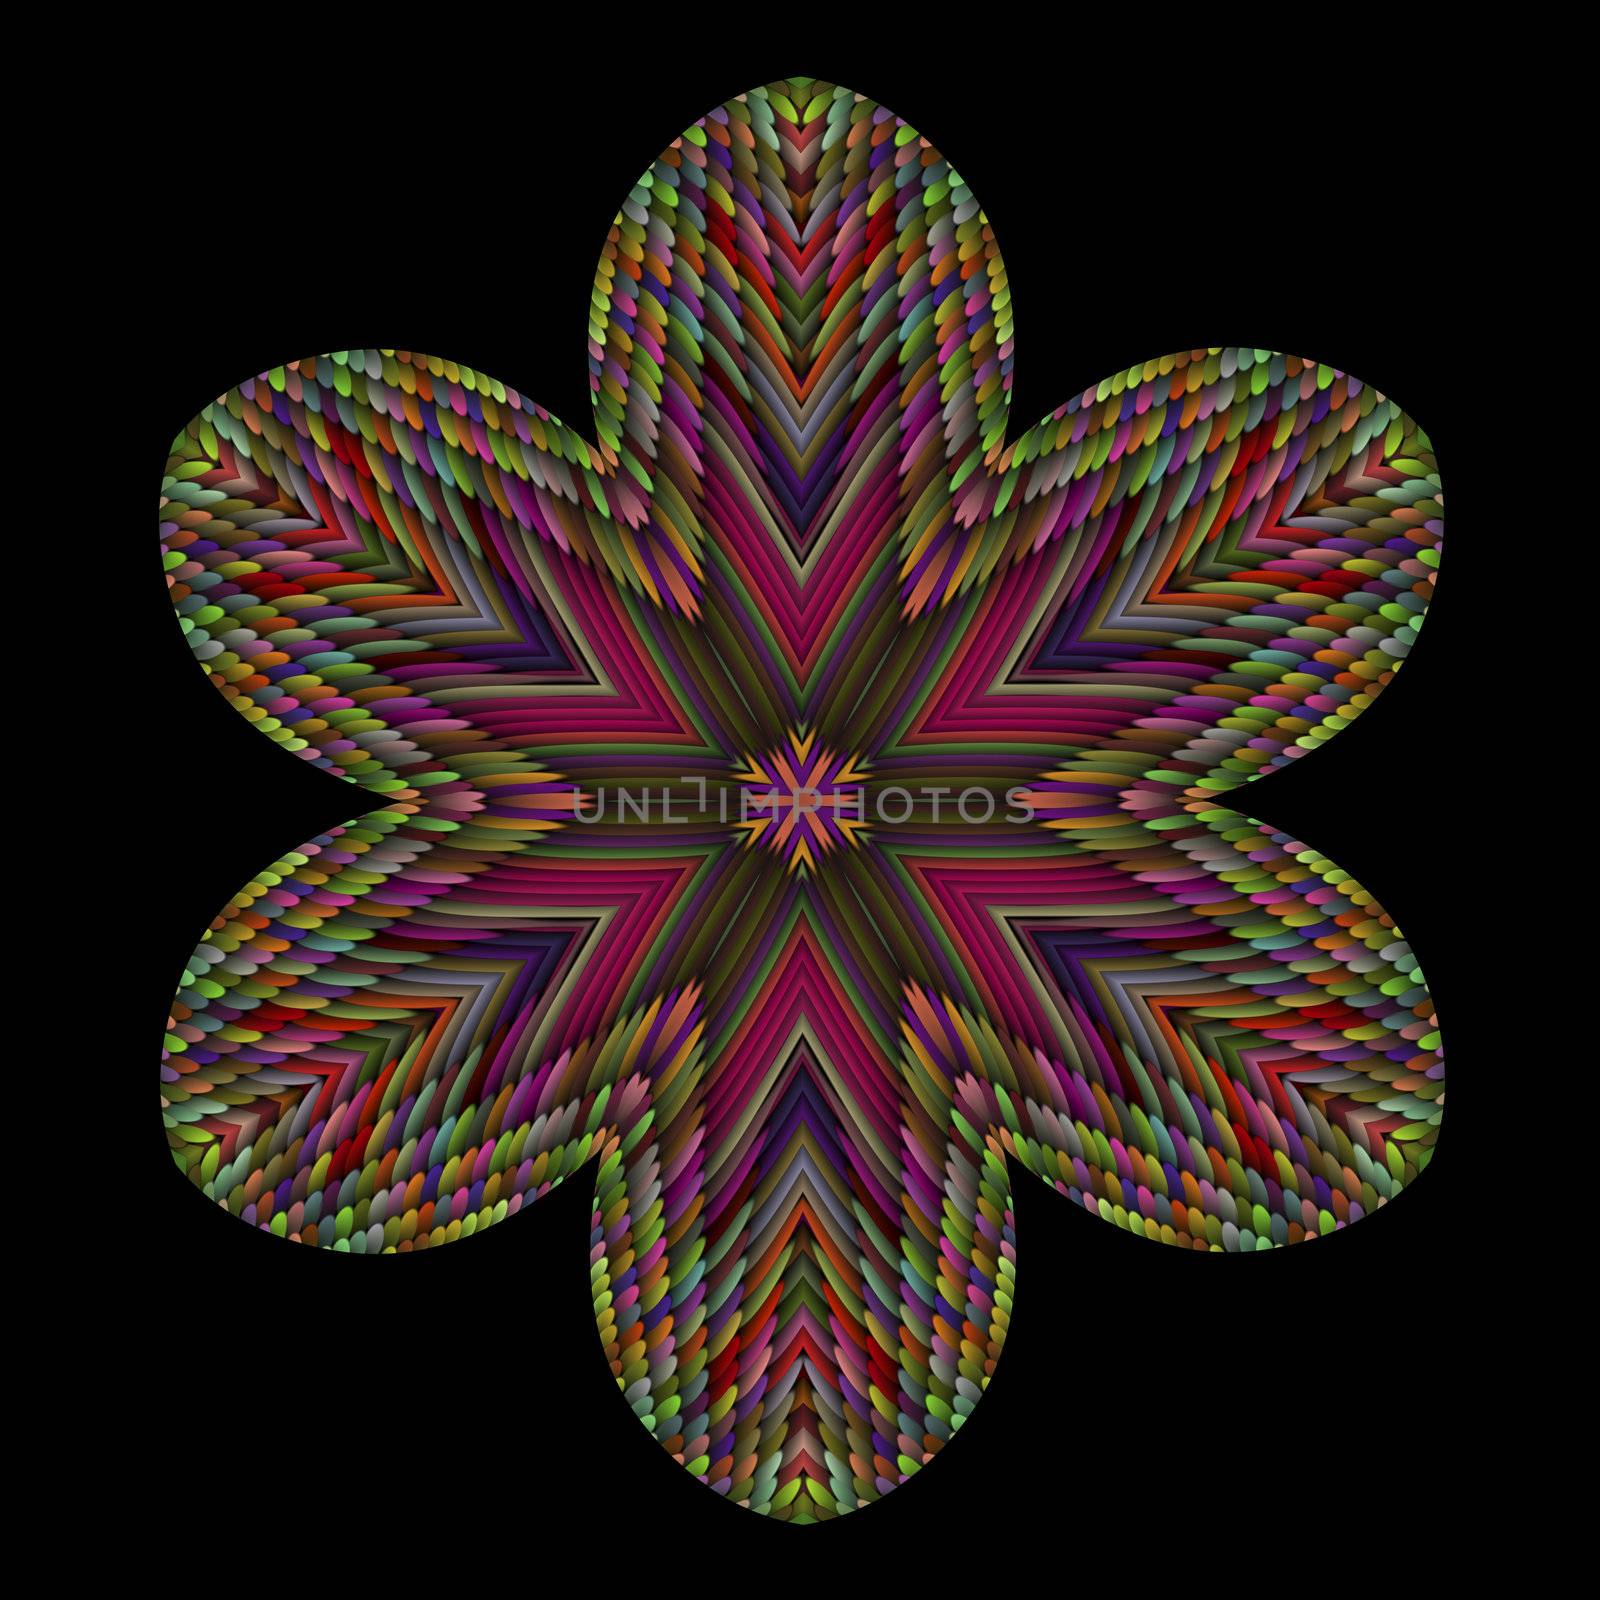 An abstract illustration of a stylized flower with a woven central pattern.